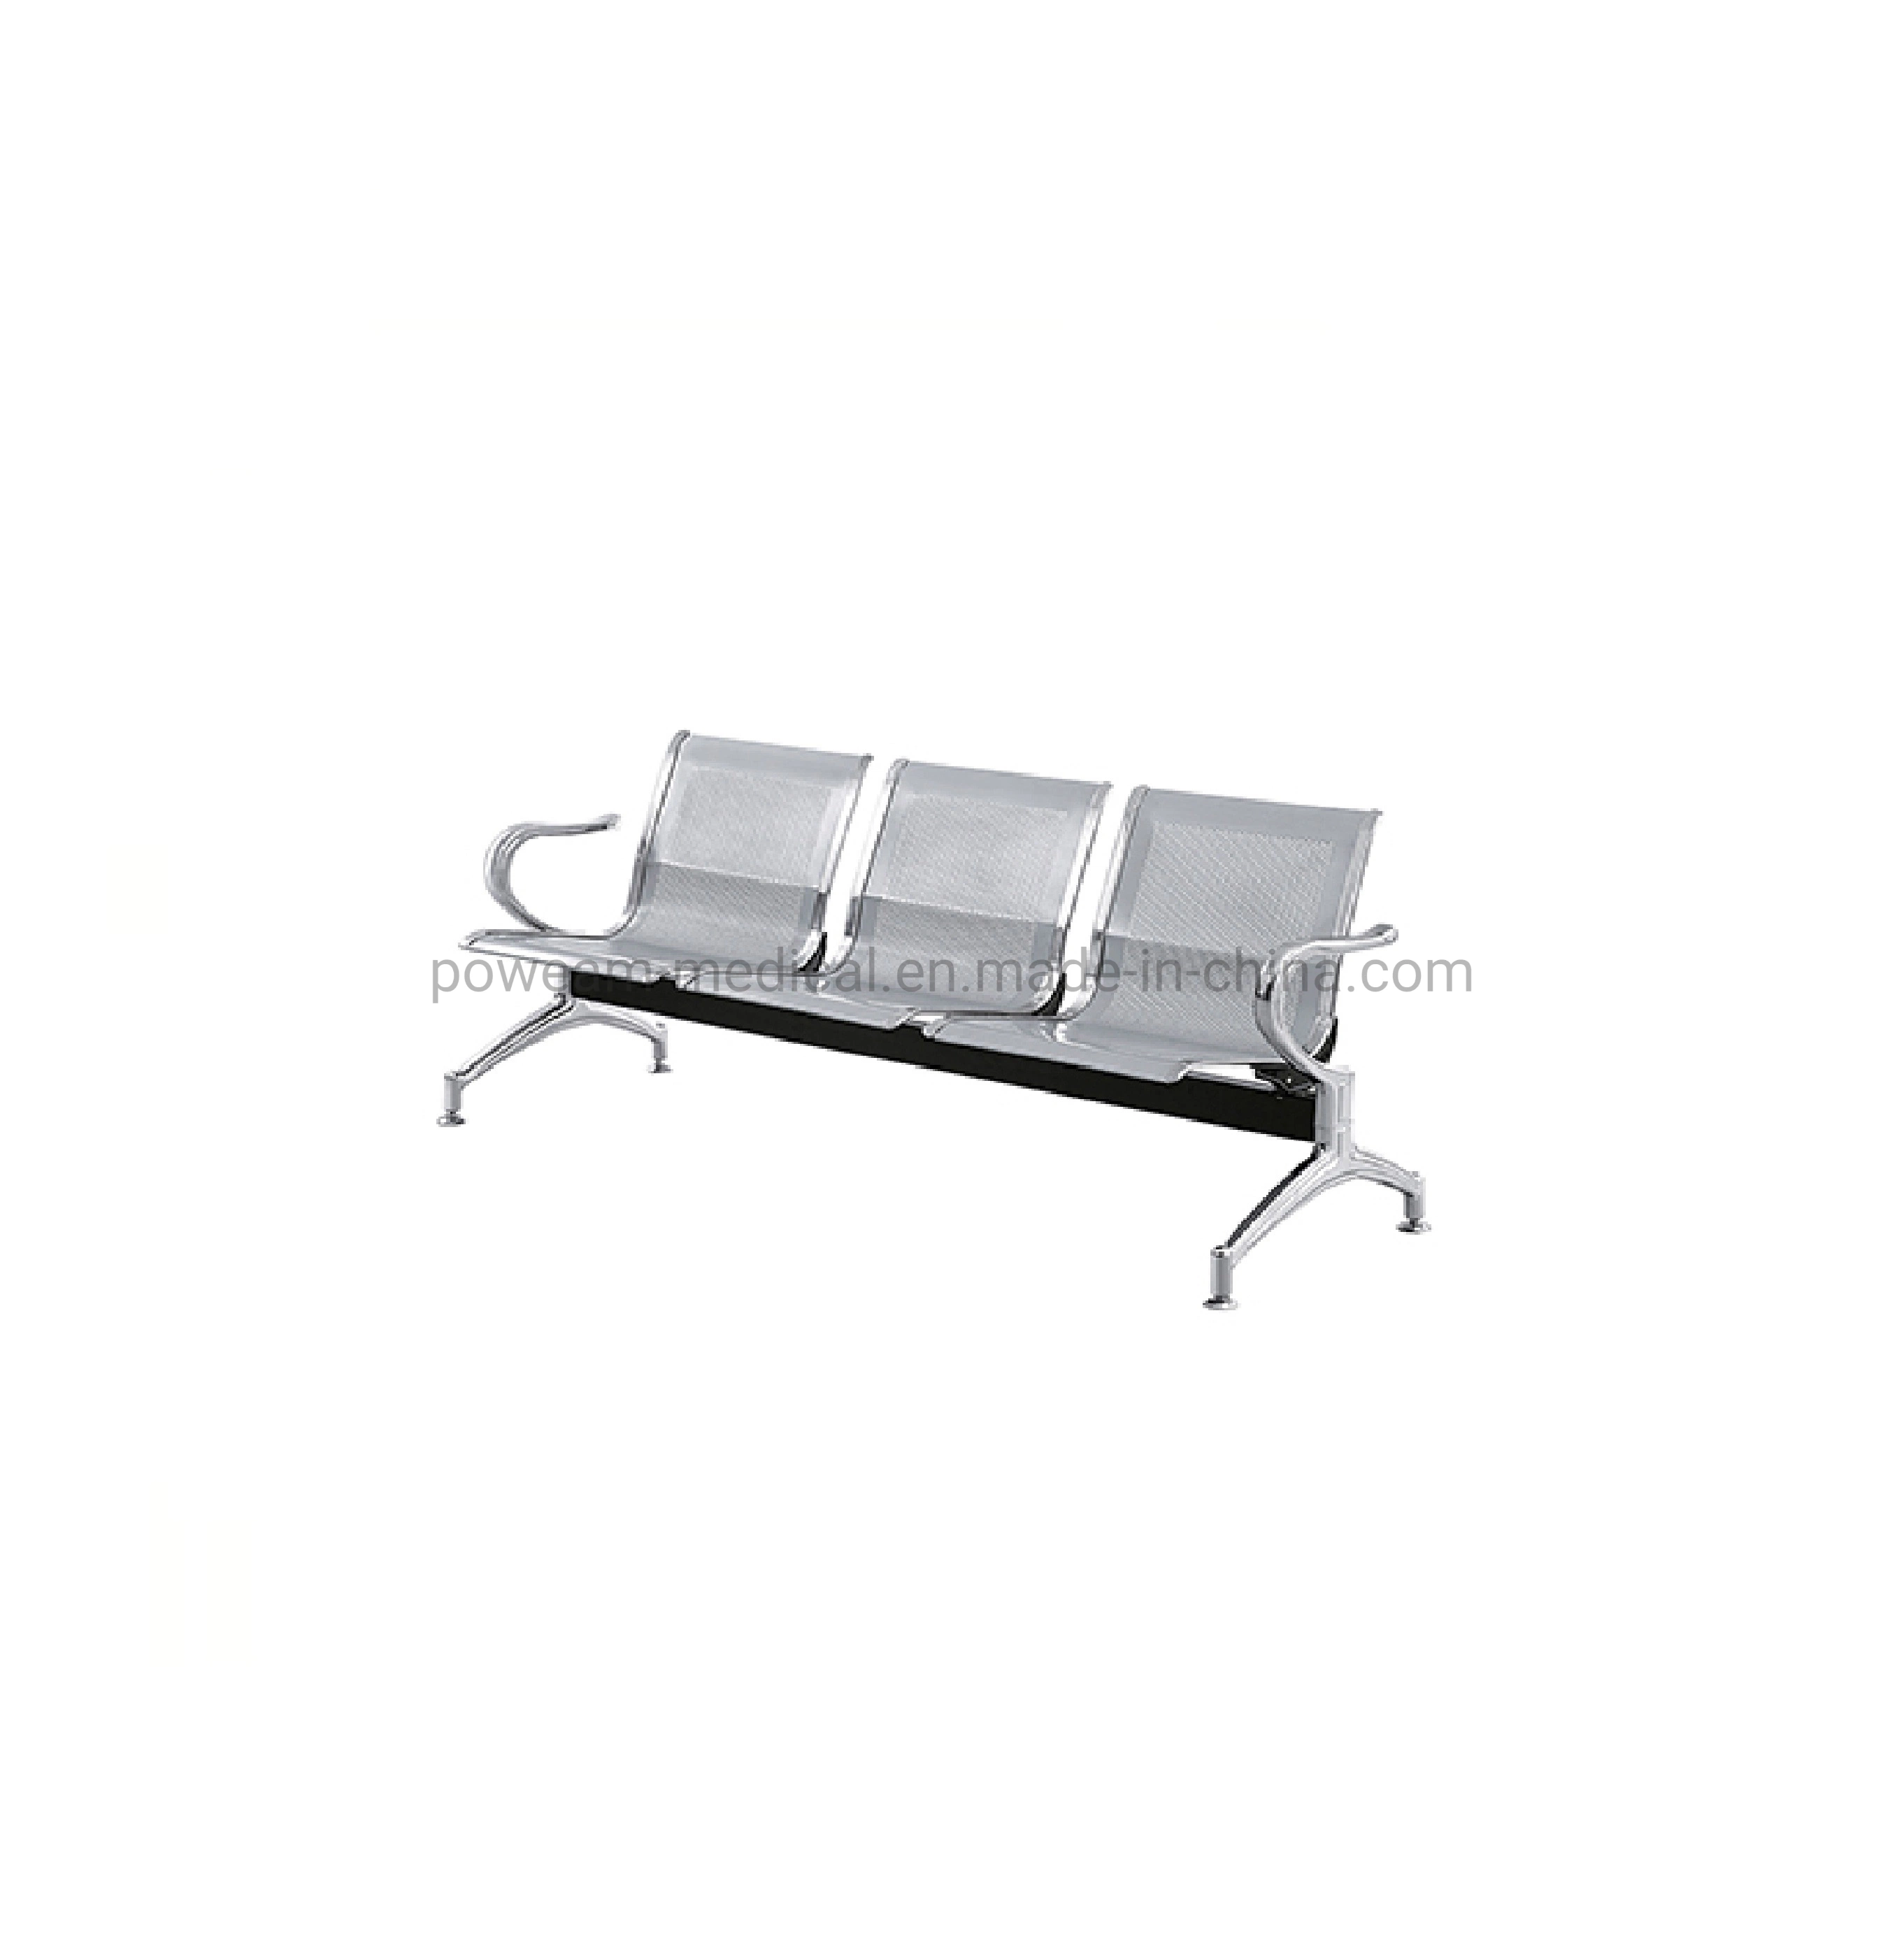 Airport Hospital Waiting Chair Bench Office Visitor Chair Metal Home Furniture